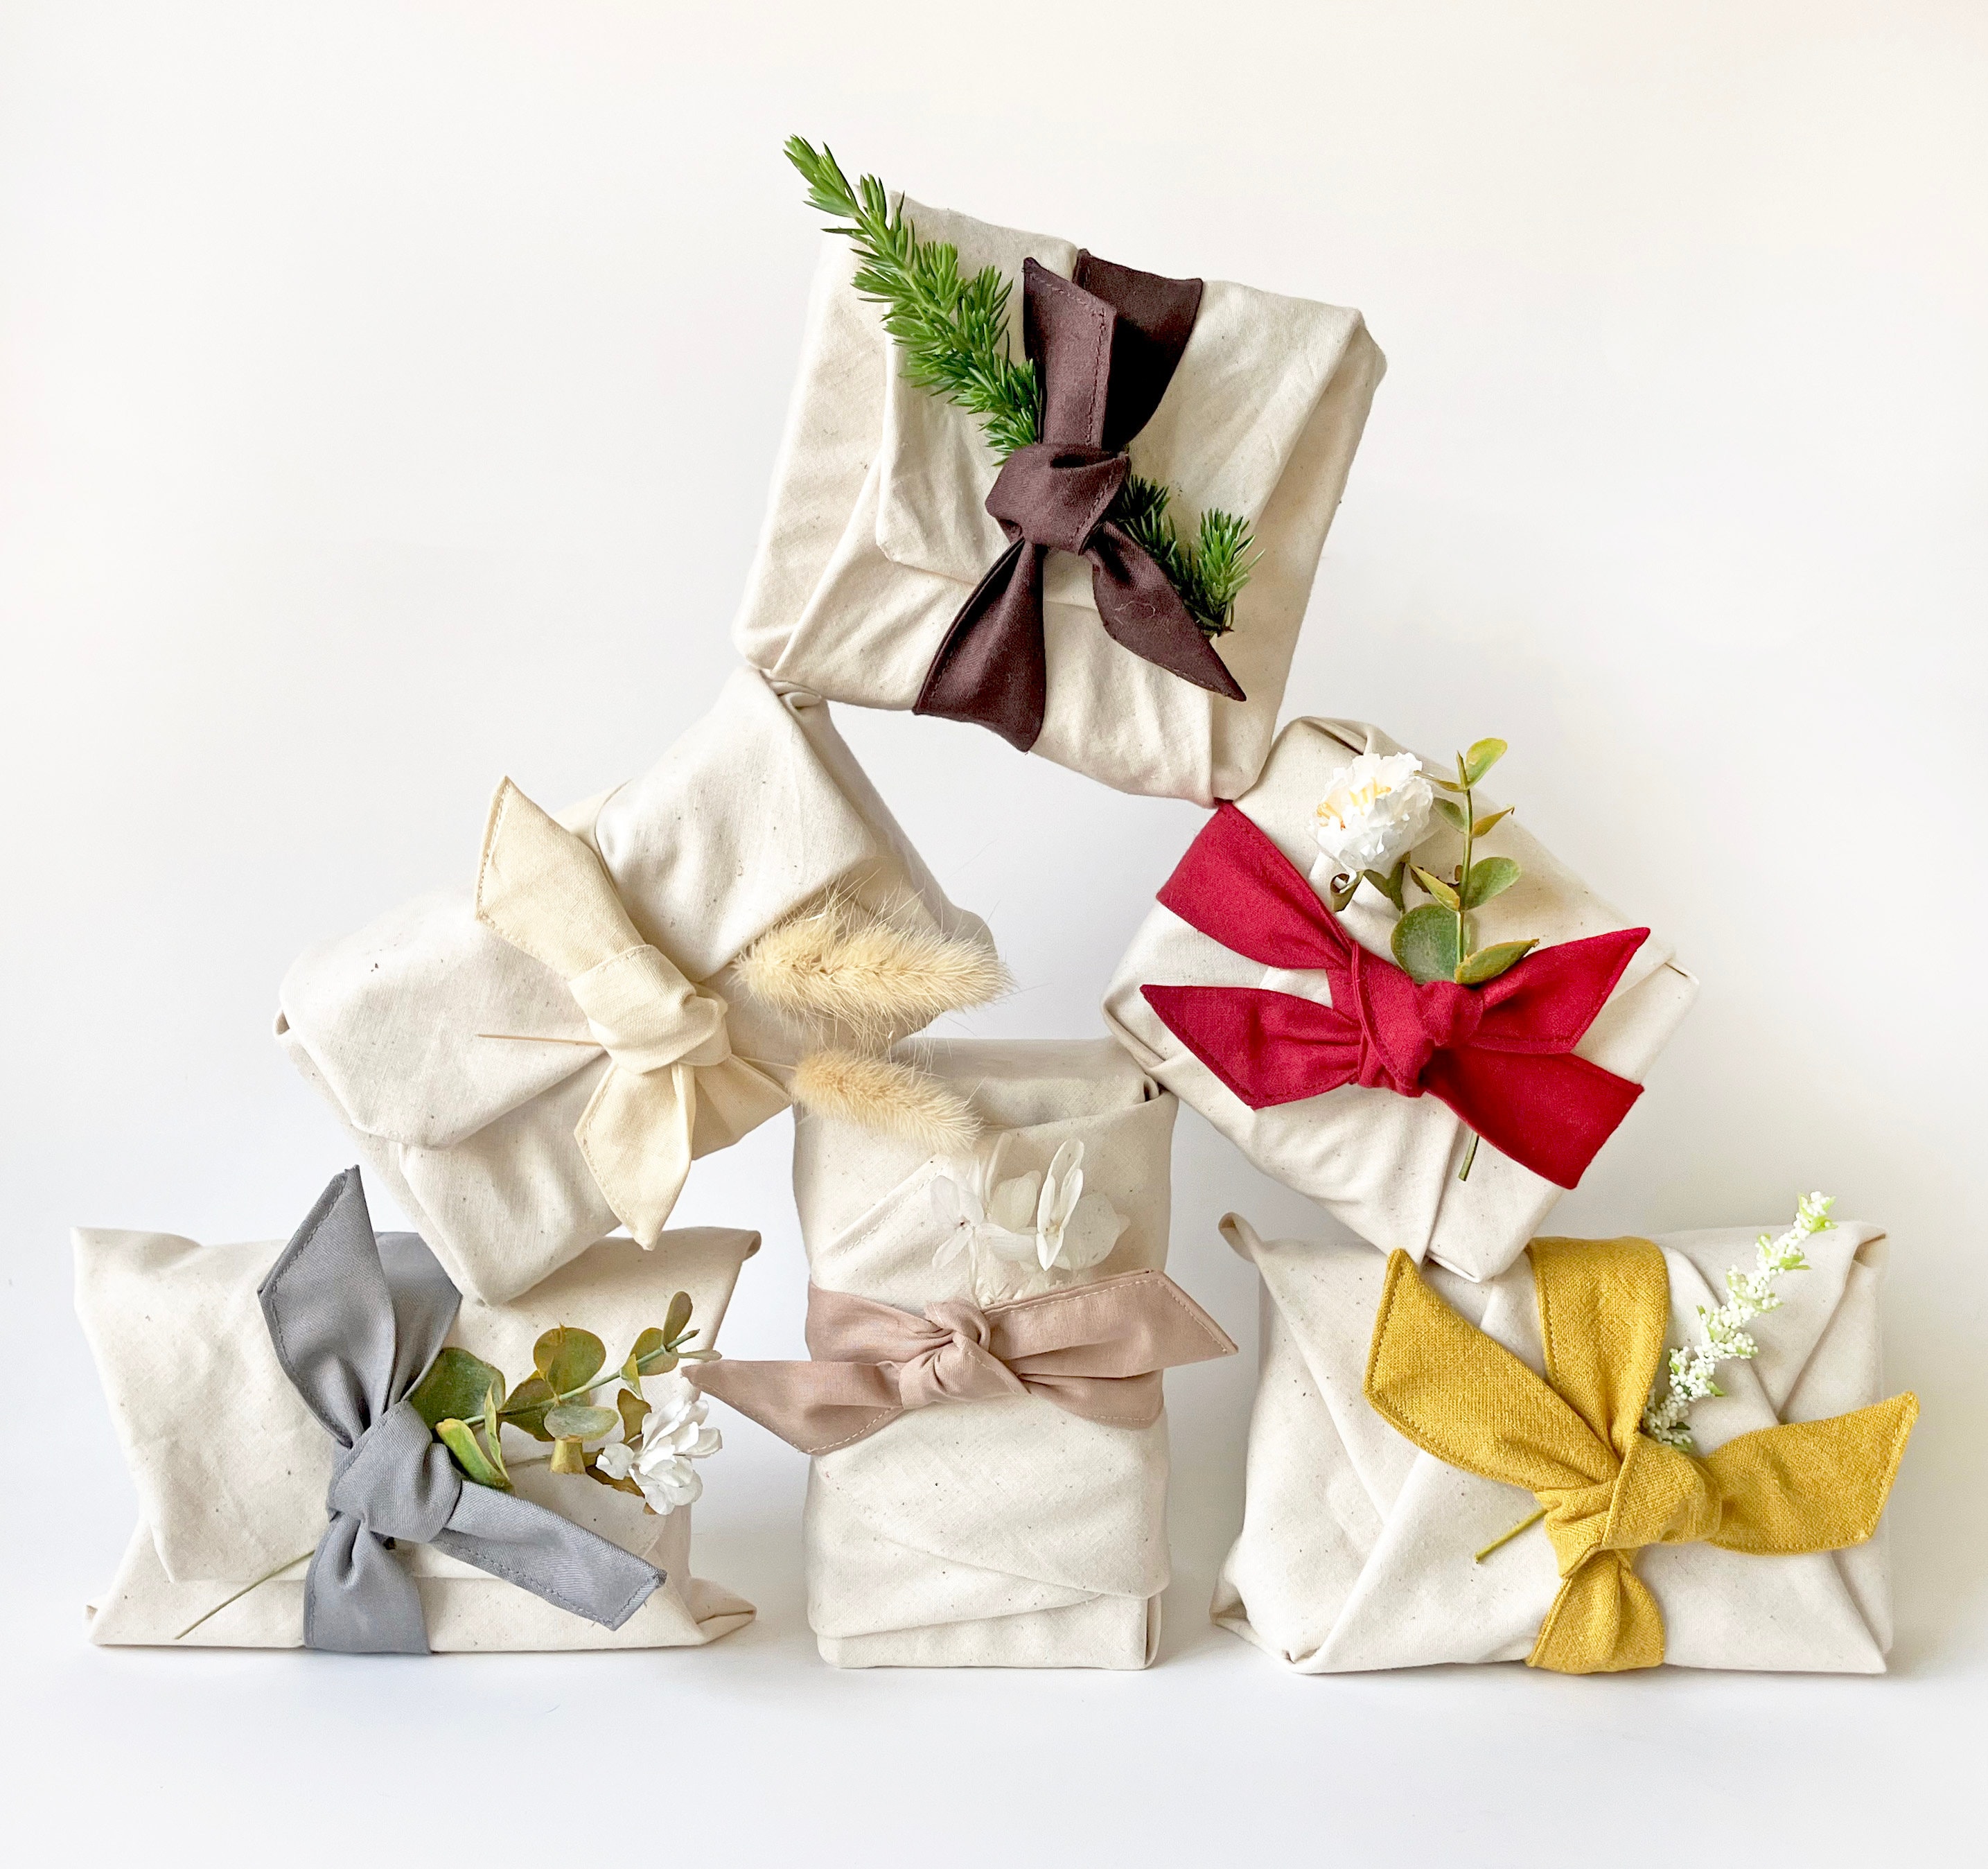 Japanese gift wrapping – The Japans